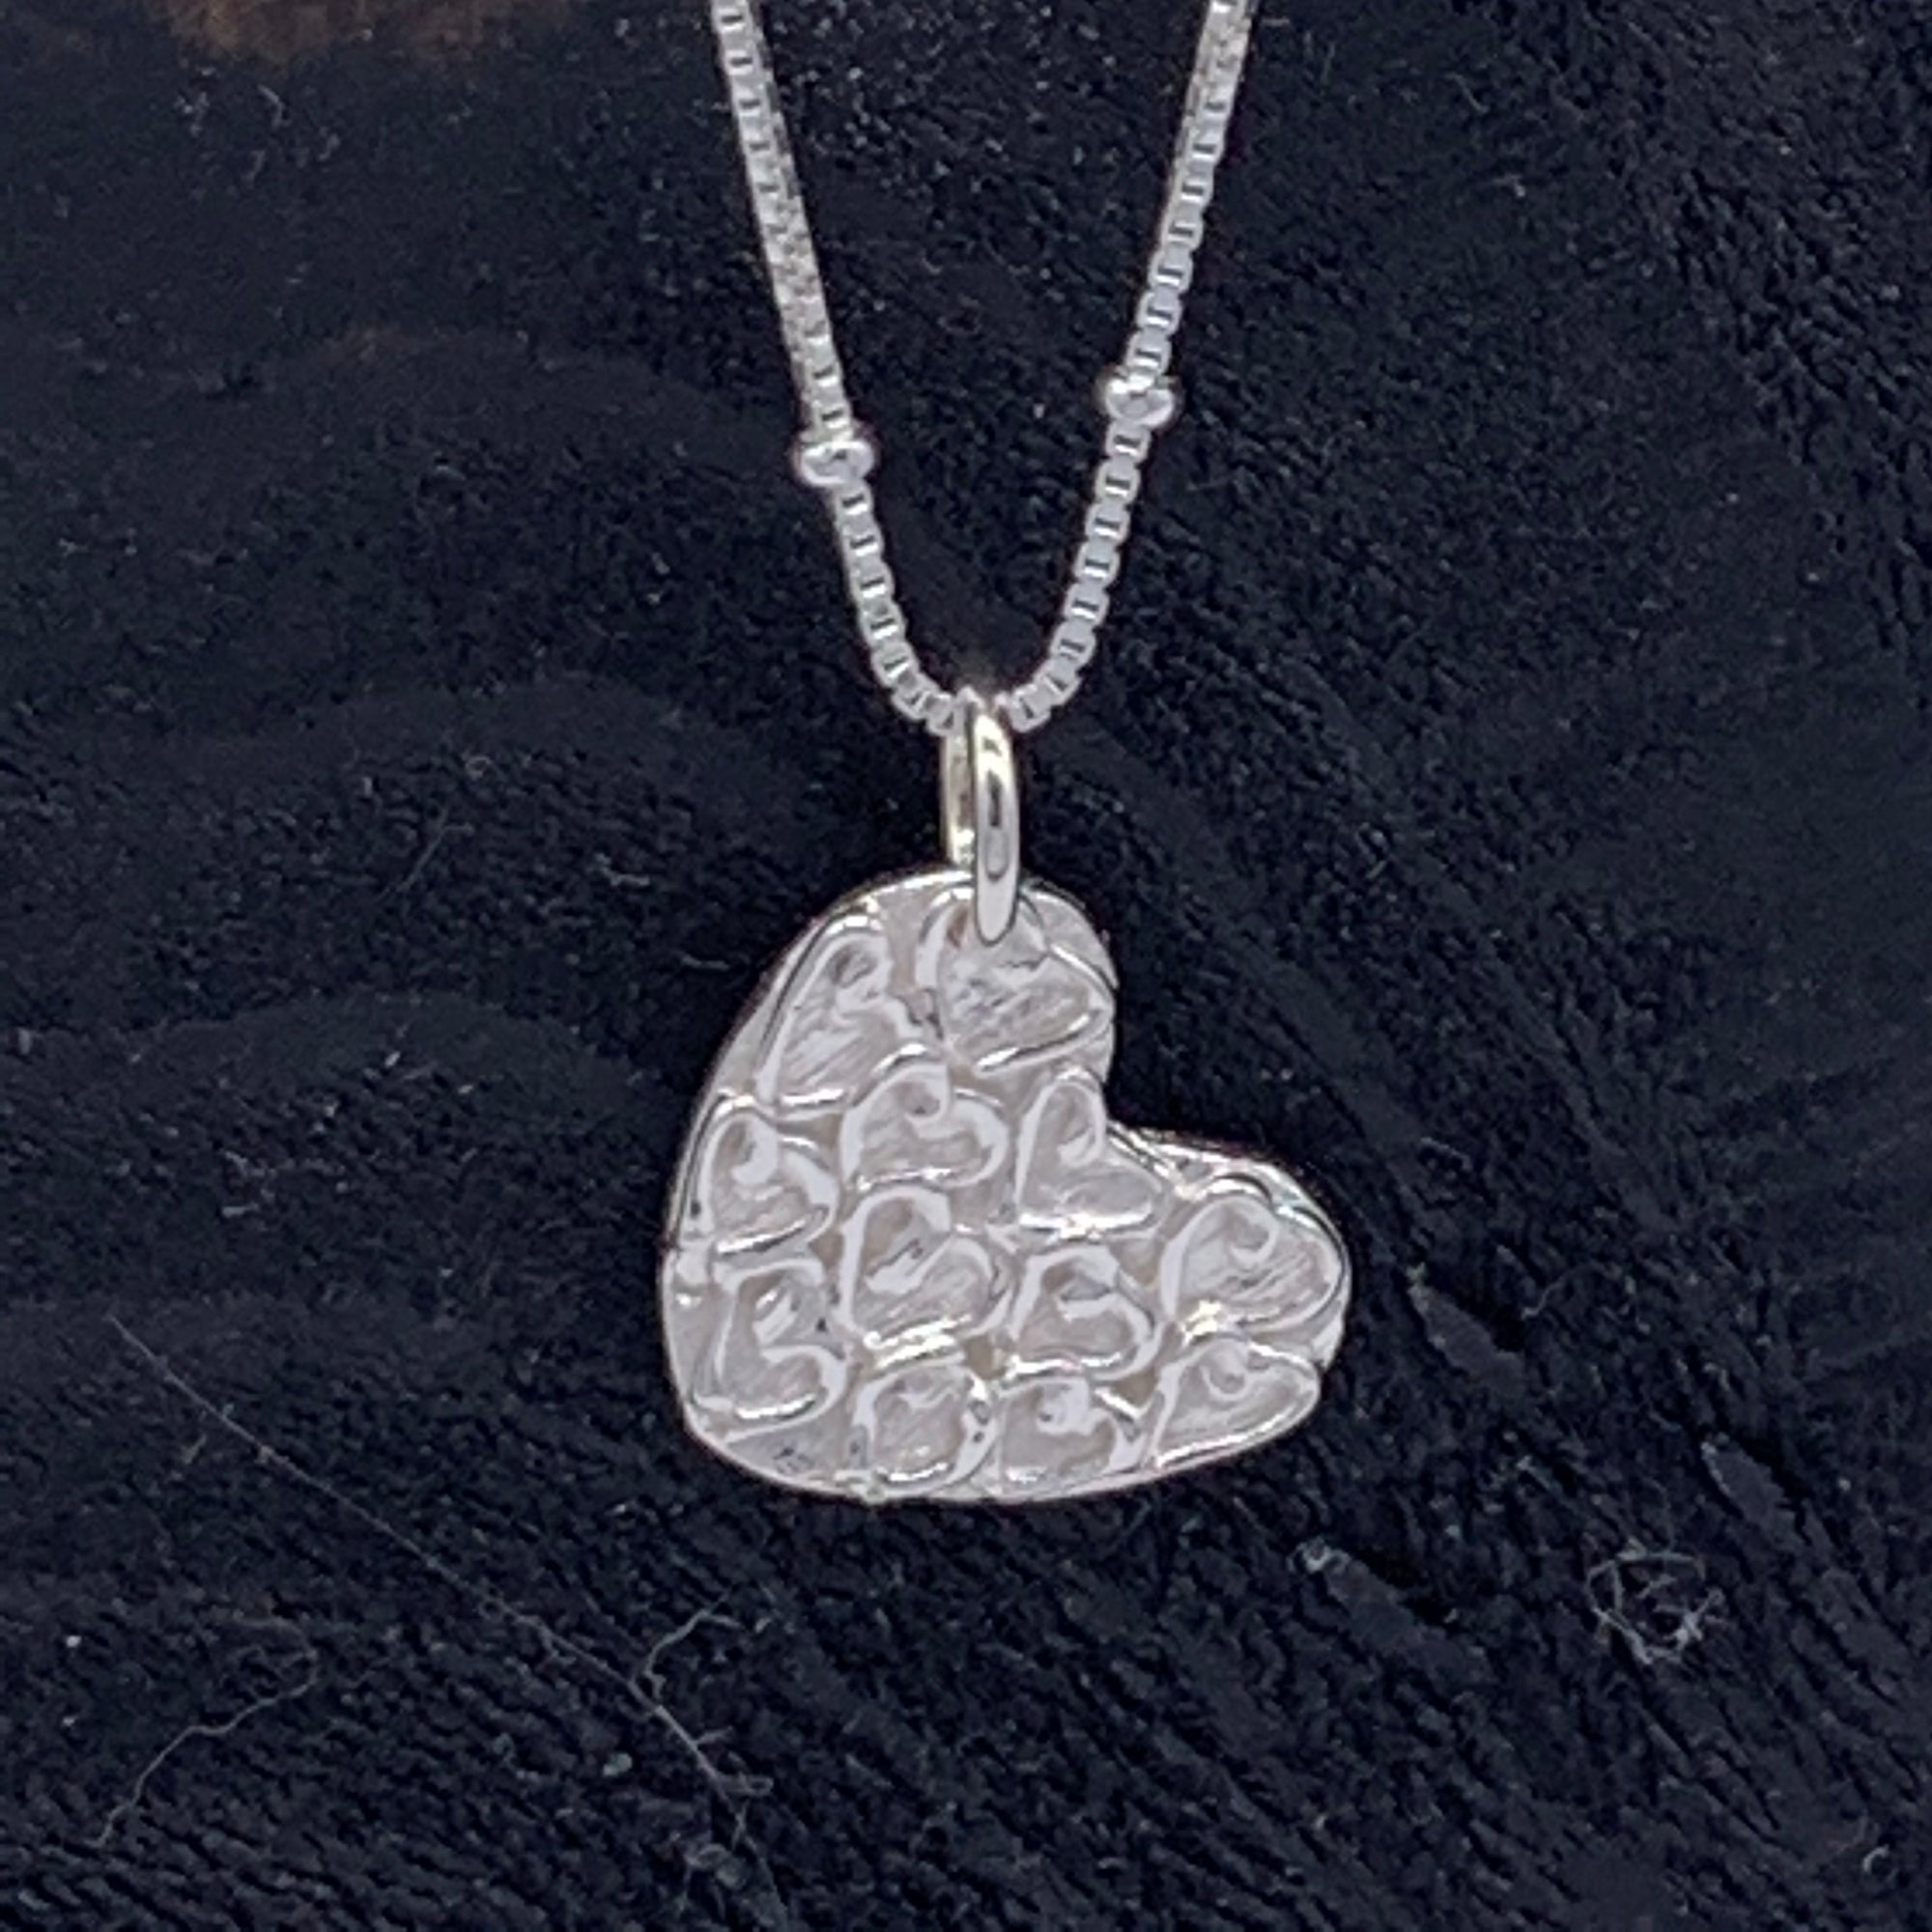 Tiny Hearts Necklace - Sterling Silver